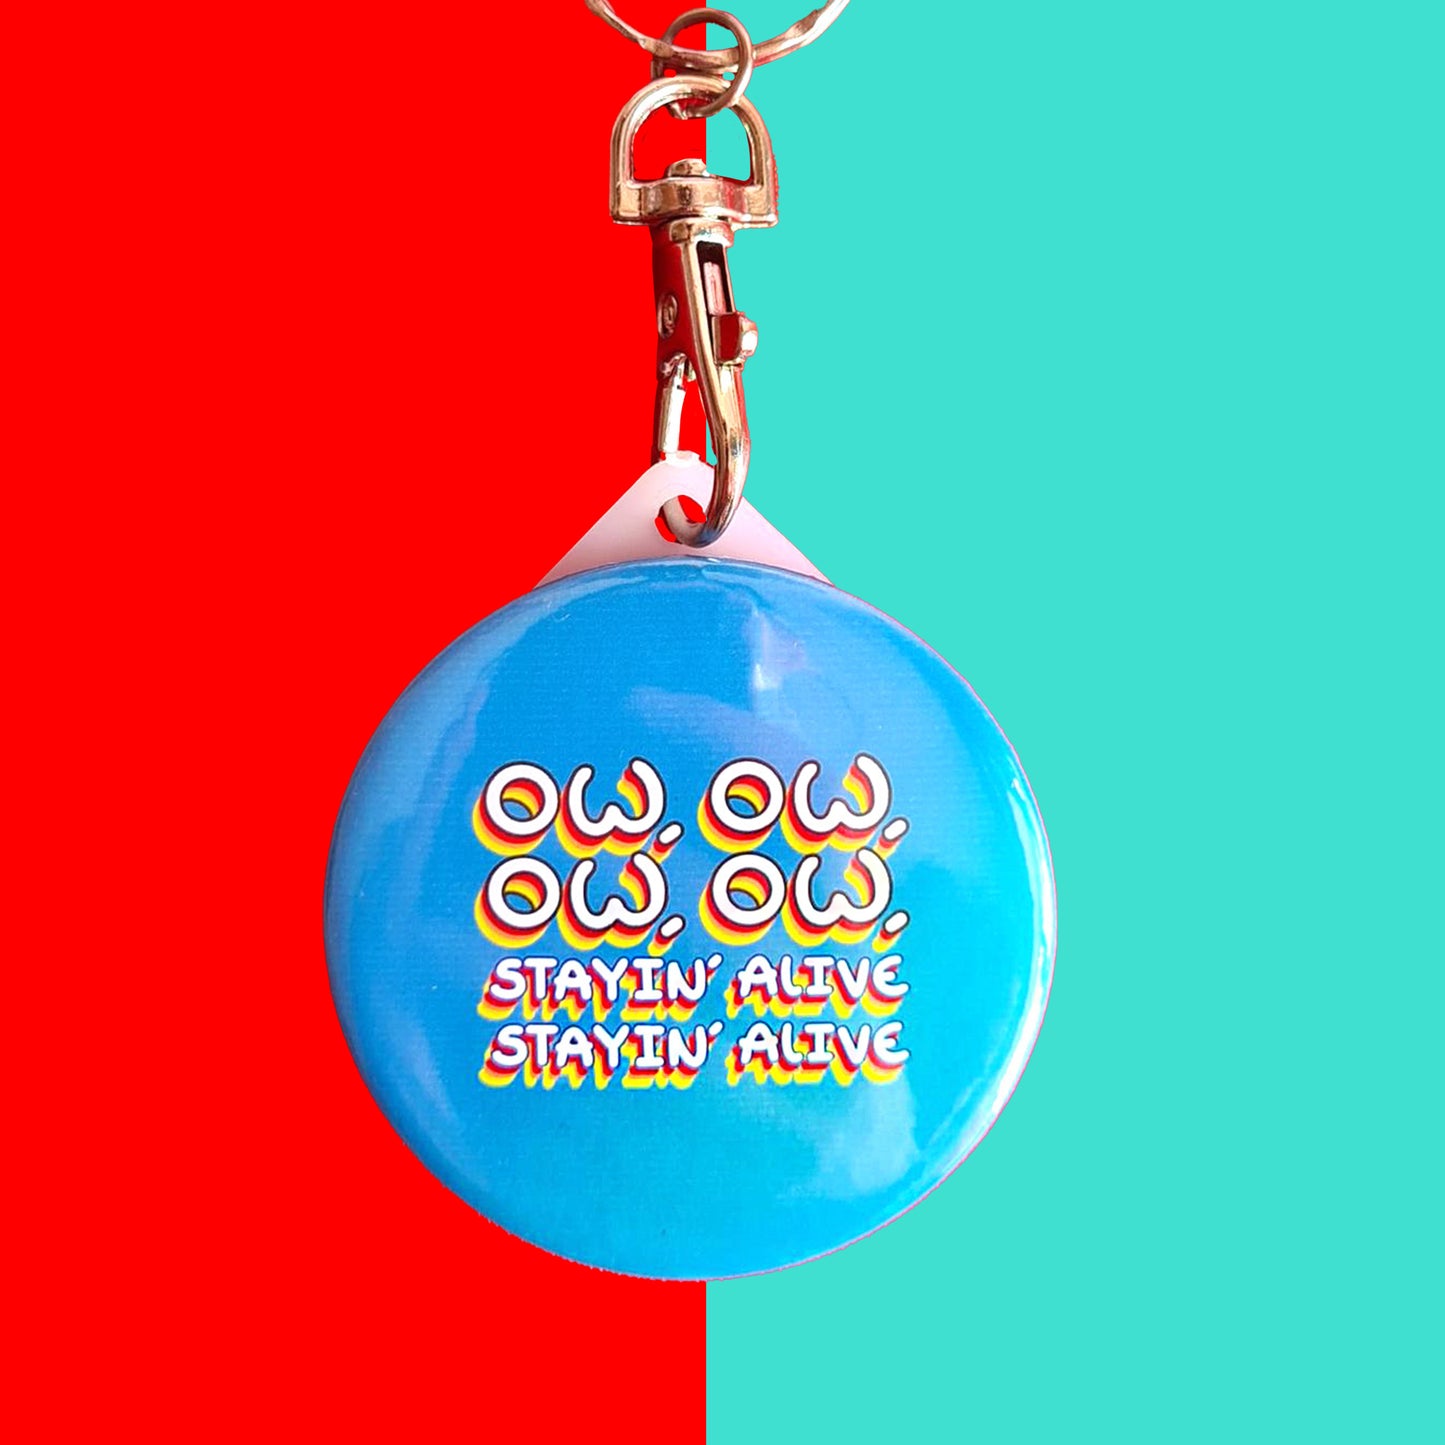 The Ow, Ow, Ow, Ow, Staying Alive Keyring on a blue and red background. The silver lobster clip plastic blue circular keychain with white text with red, orange and yellow borders reading 'ow, ow, ow, ow, stayin' alive stayin' alive'.